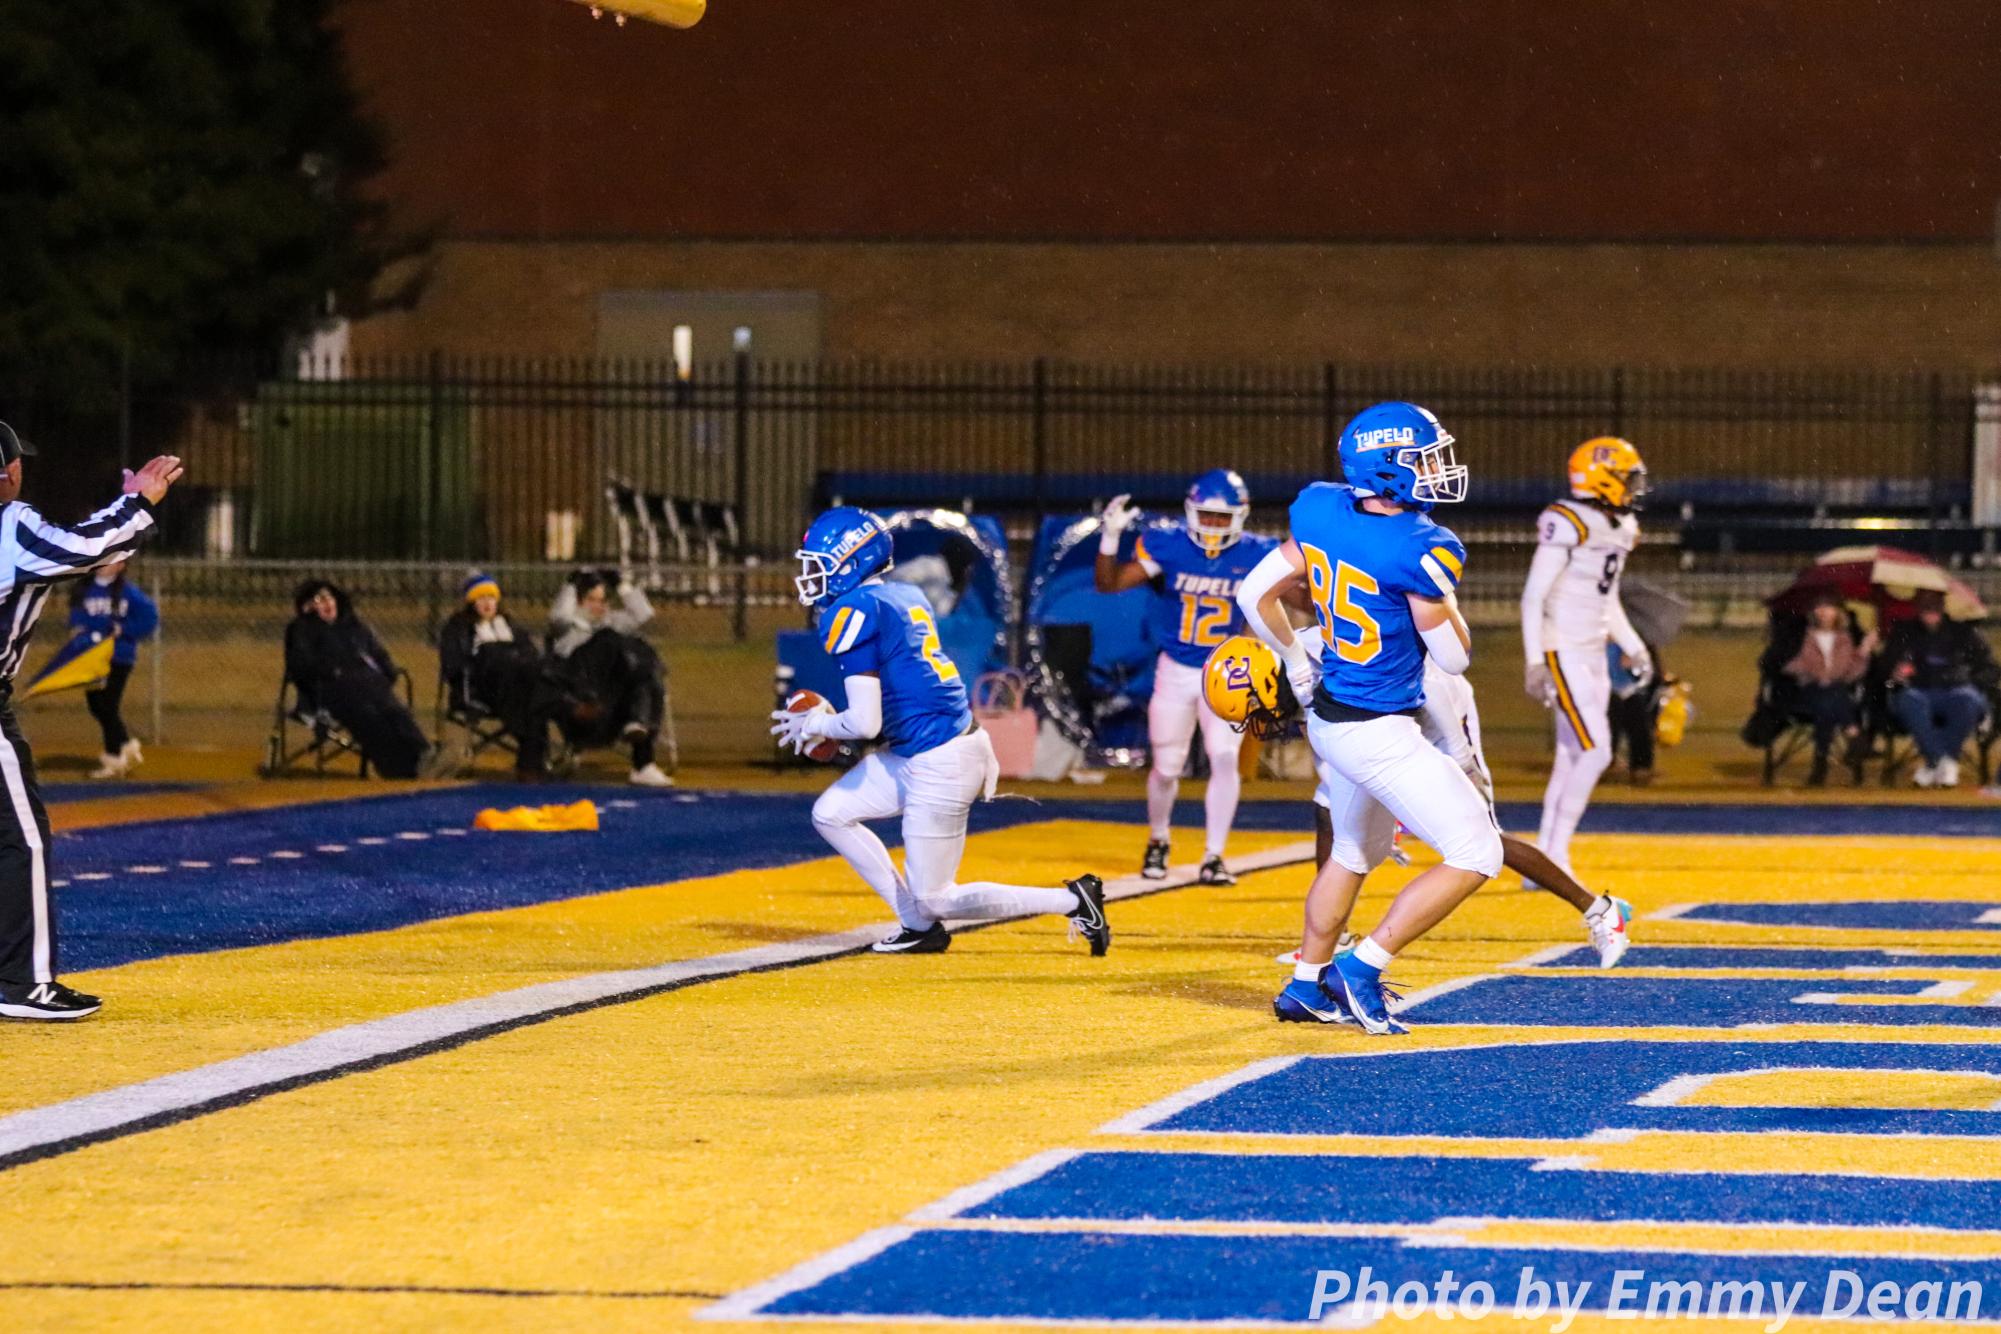 Tupelo+kicks+off+playoffs+with+win+against+Desoto+Central